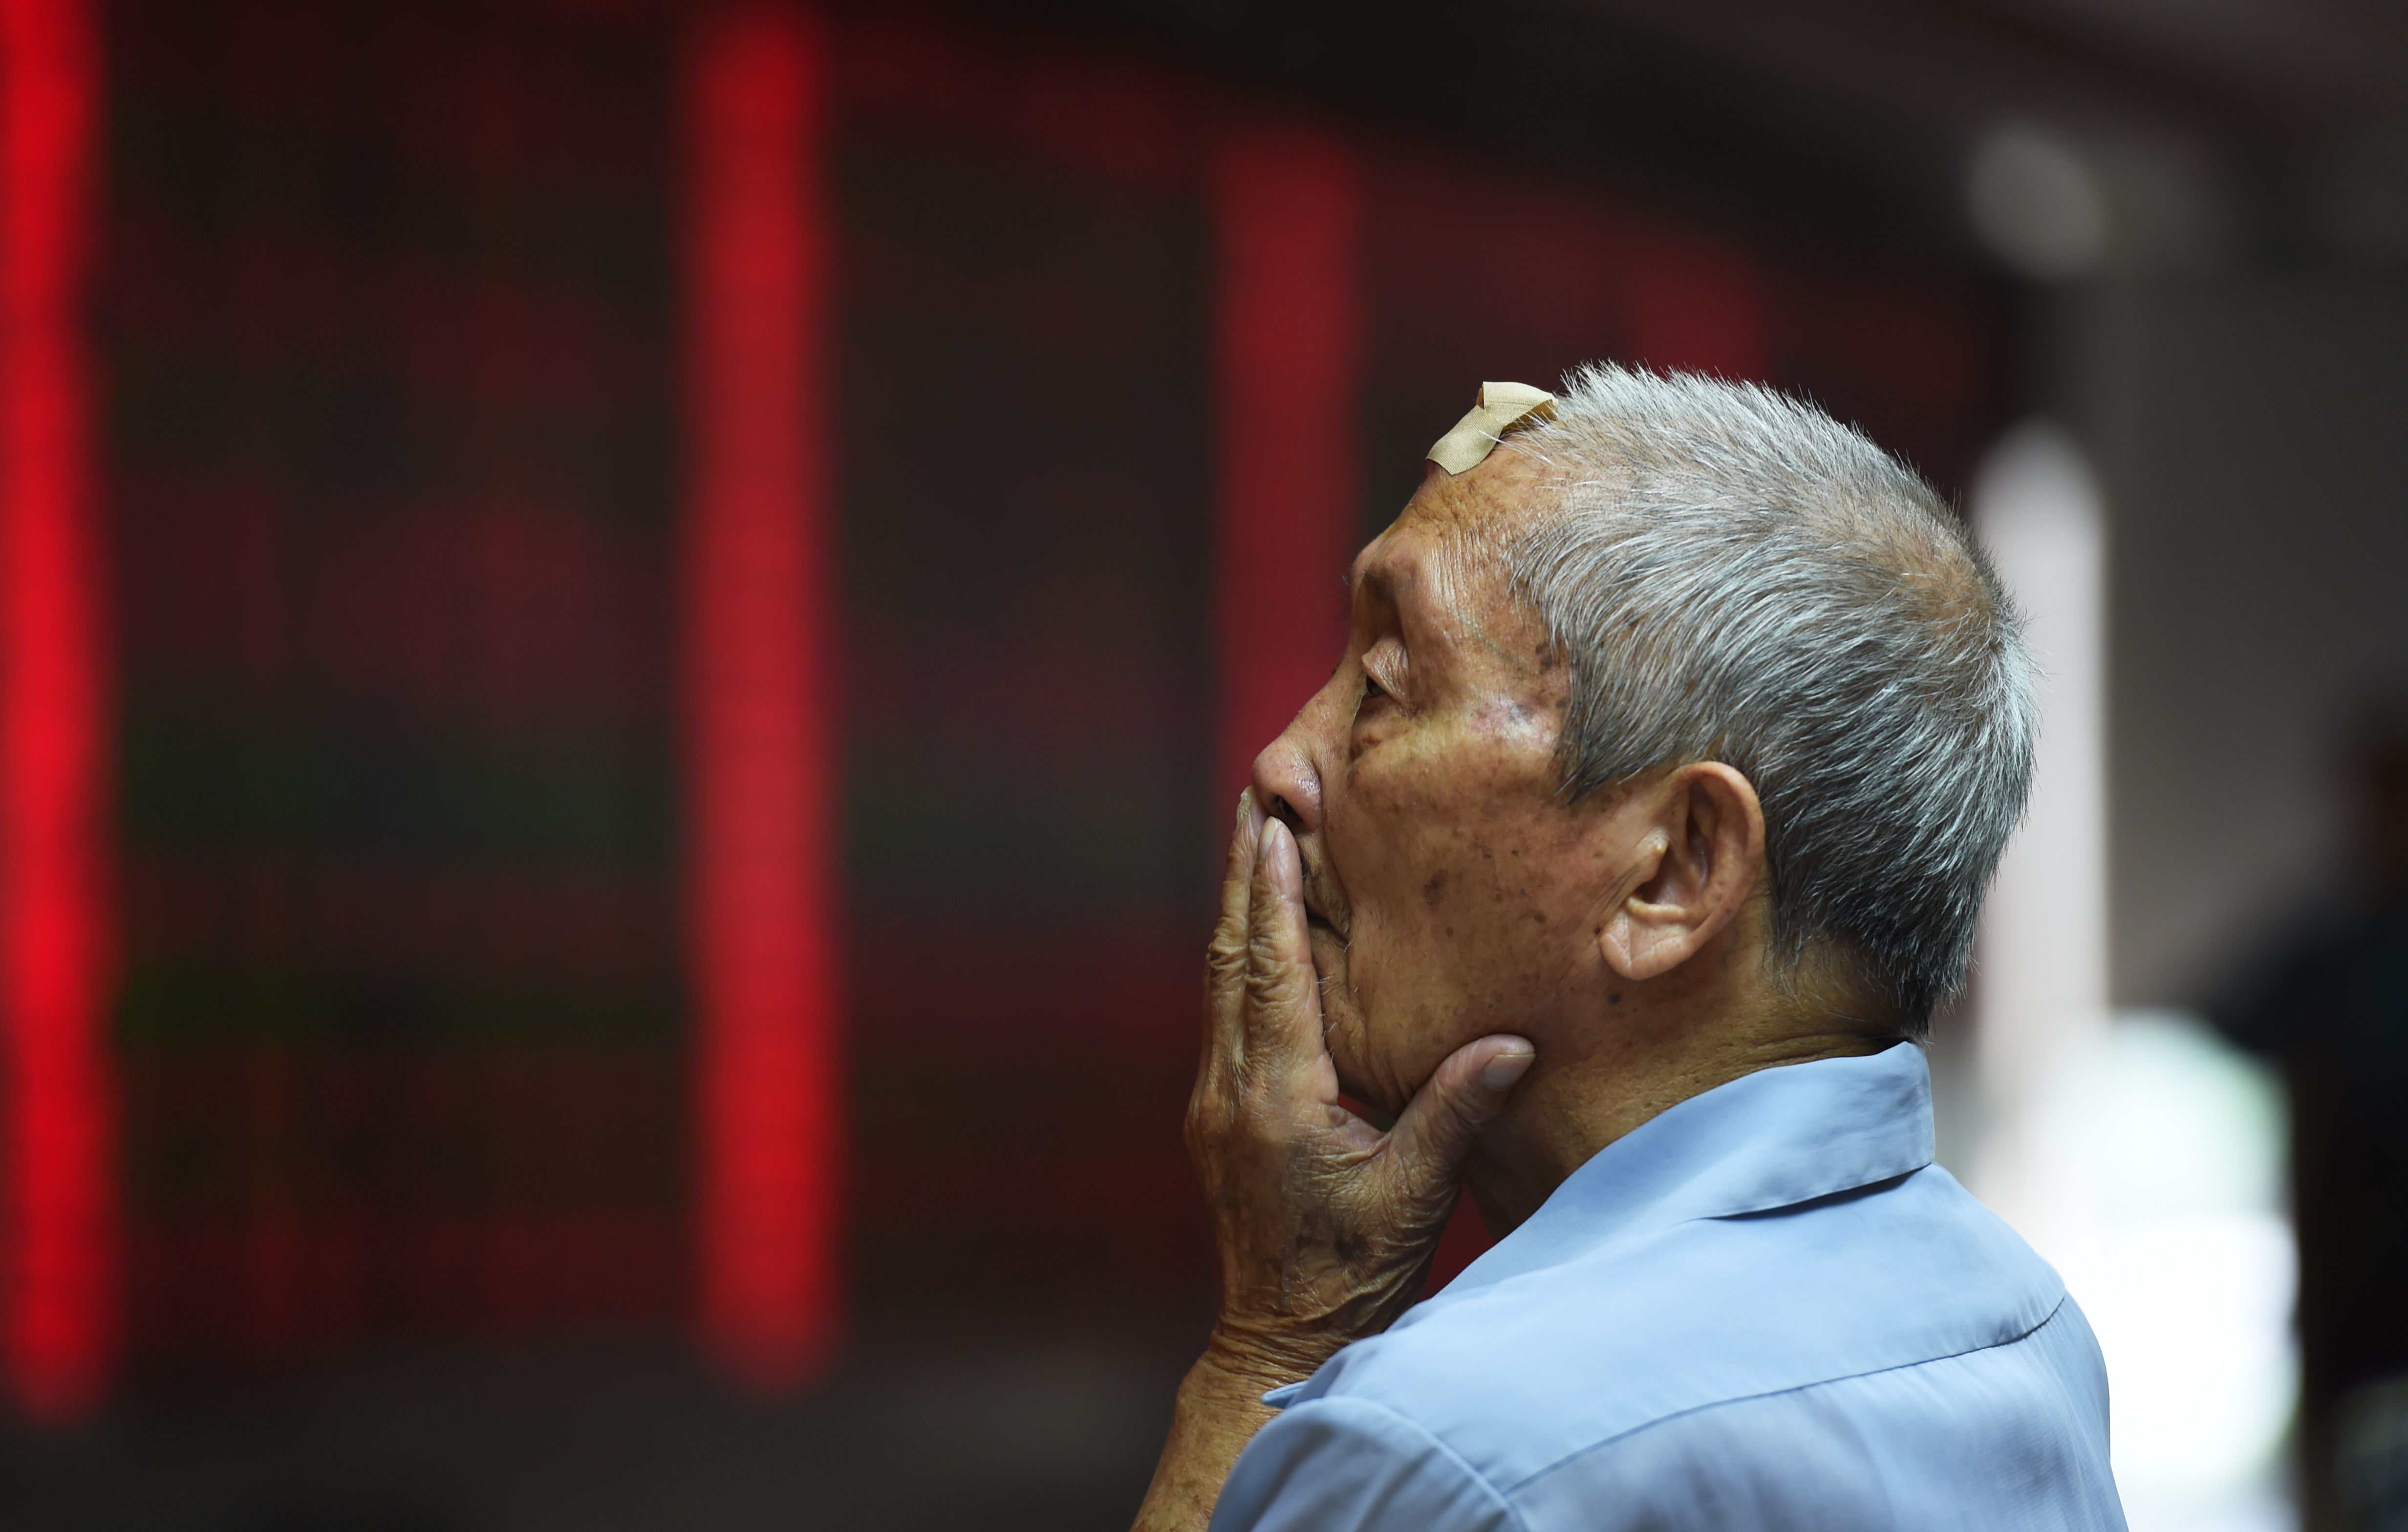 Many industry professionals believe more will have to be done in the weeks ahead to return stability to China's stock markets. Photo: AFP